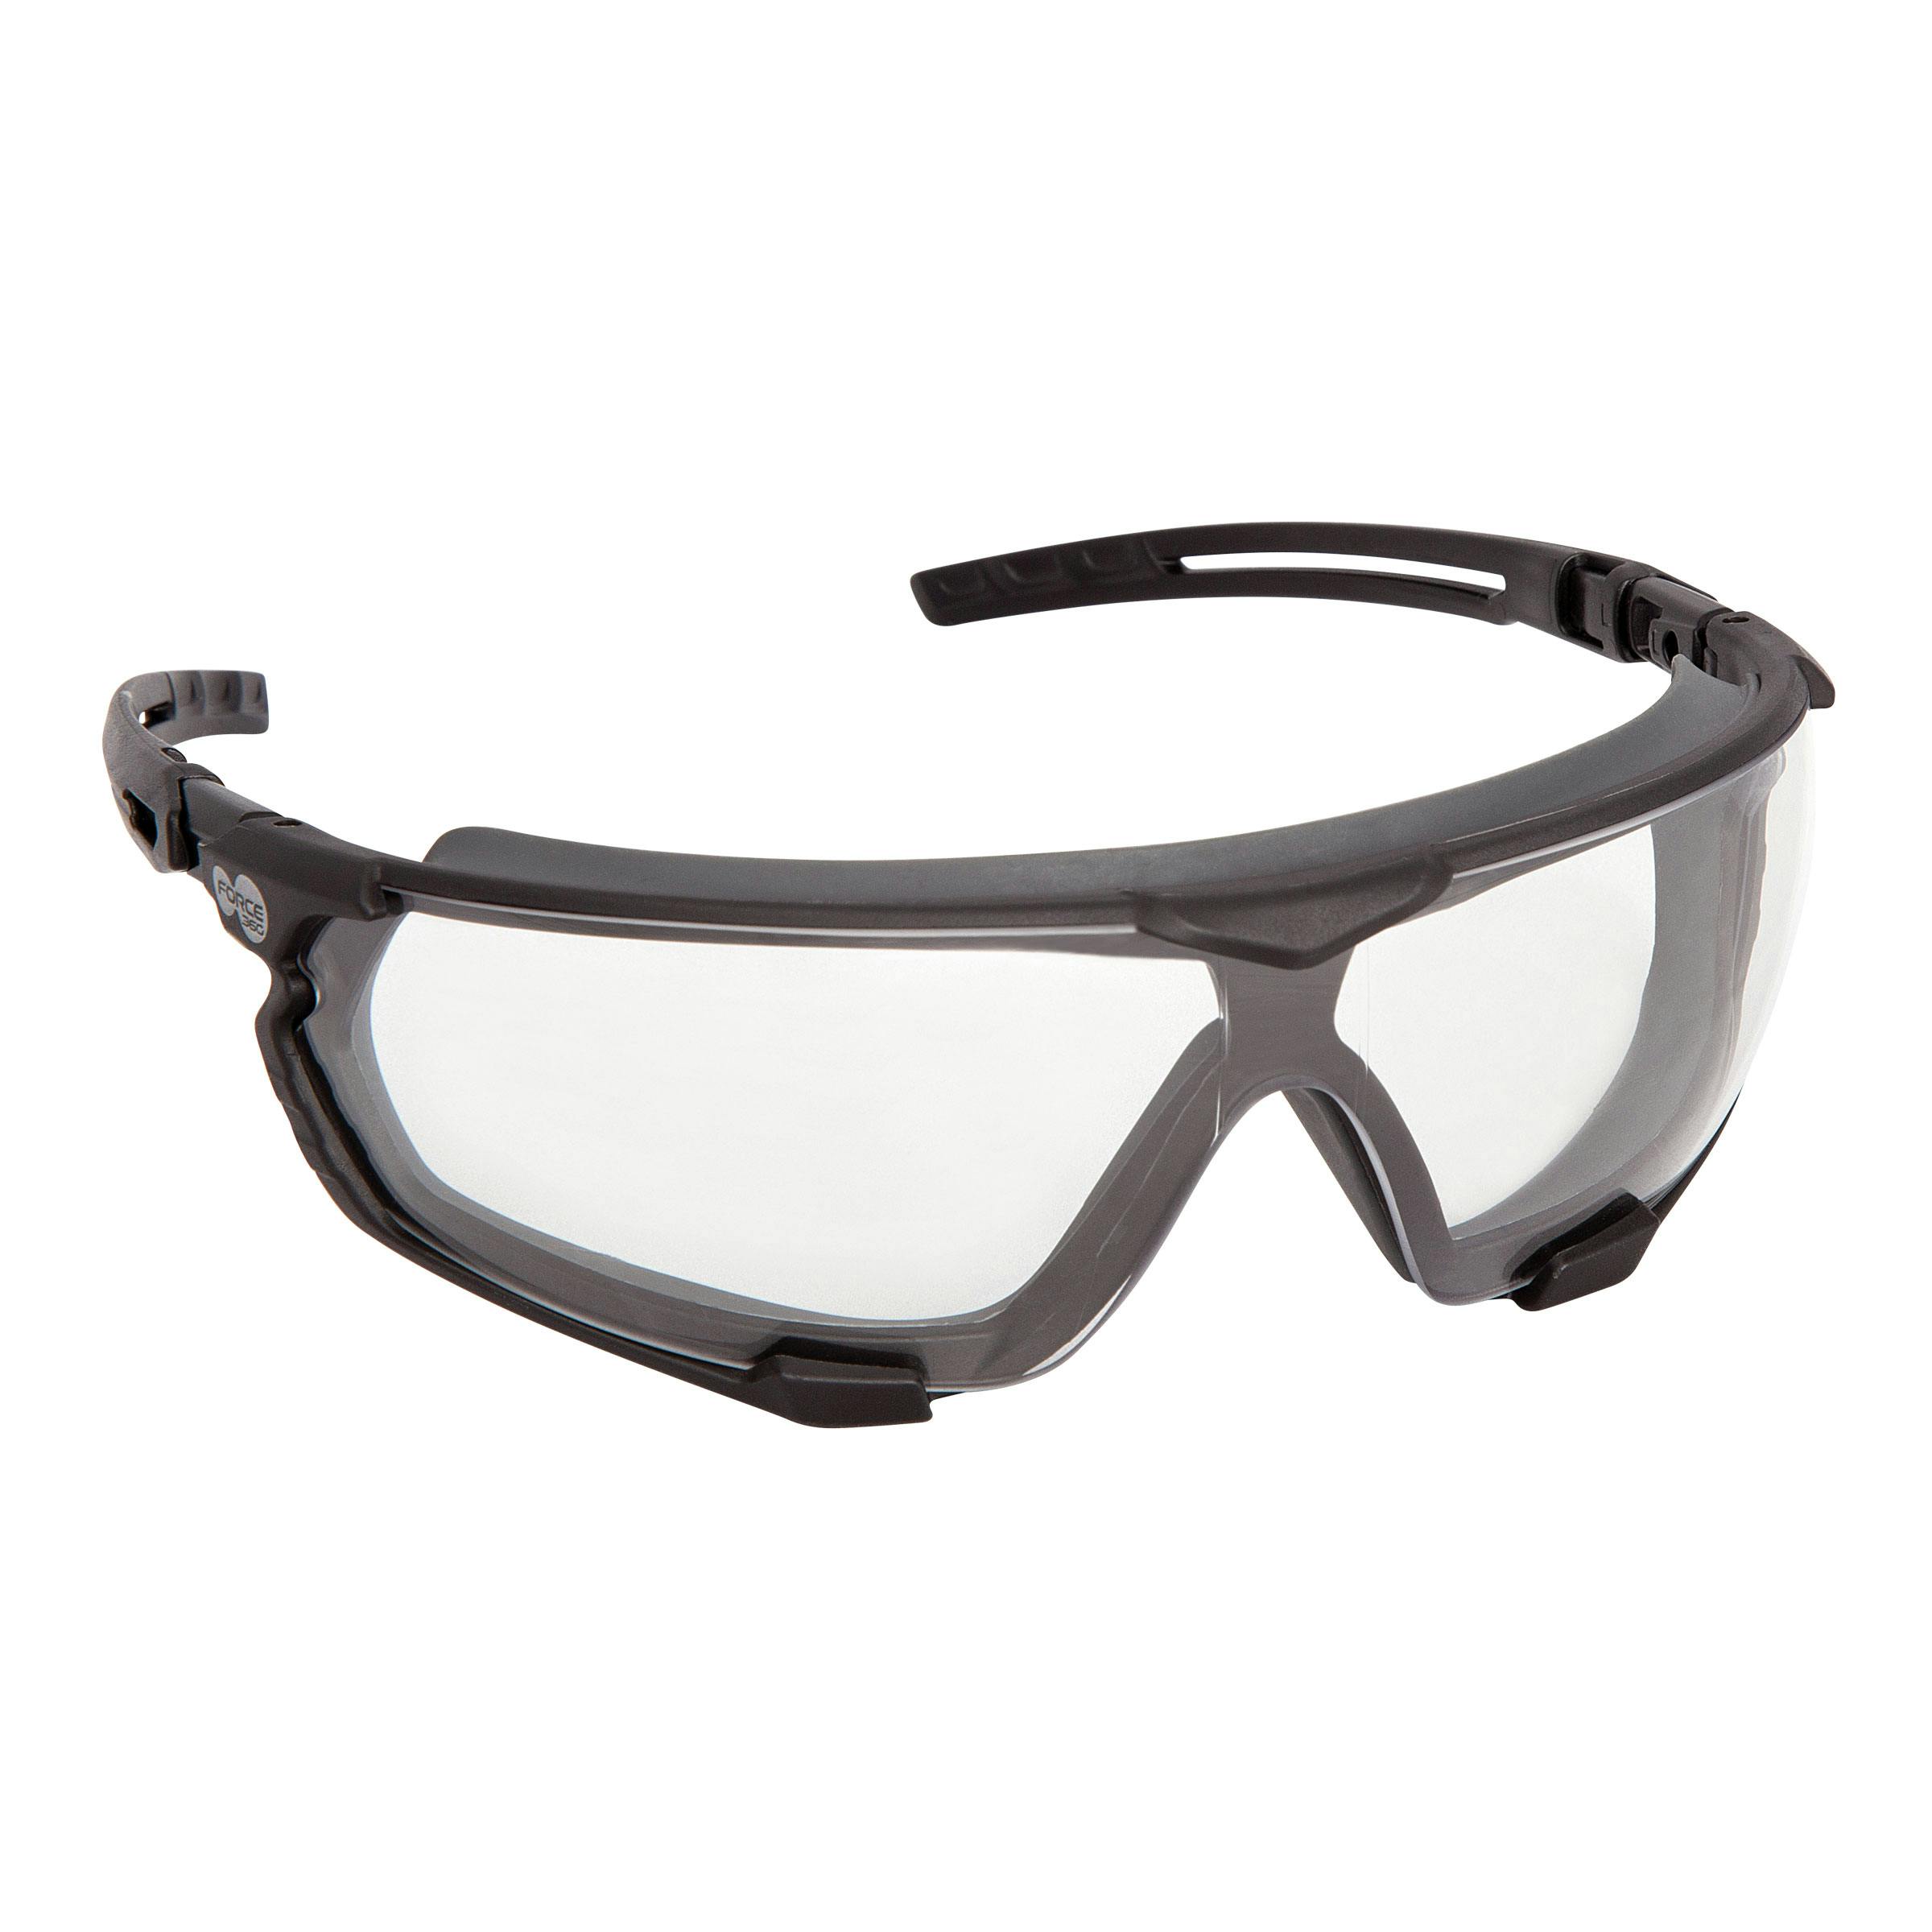 Force360 Arma SI Safety Spectacle With Silicon Gasket